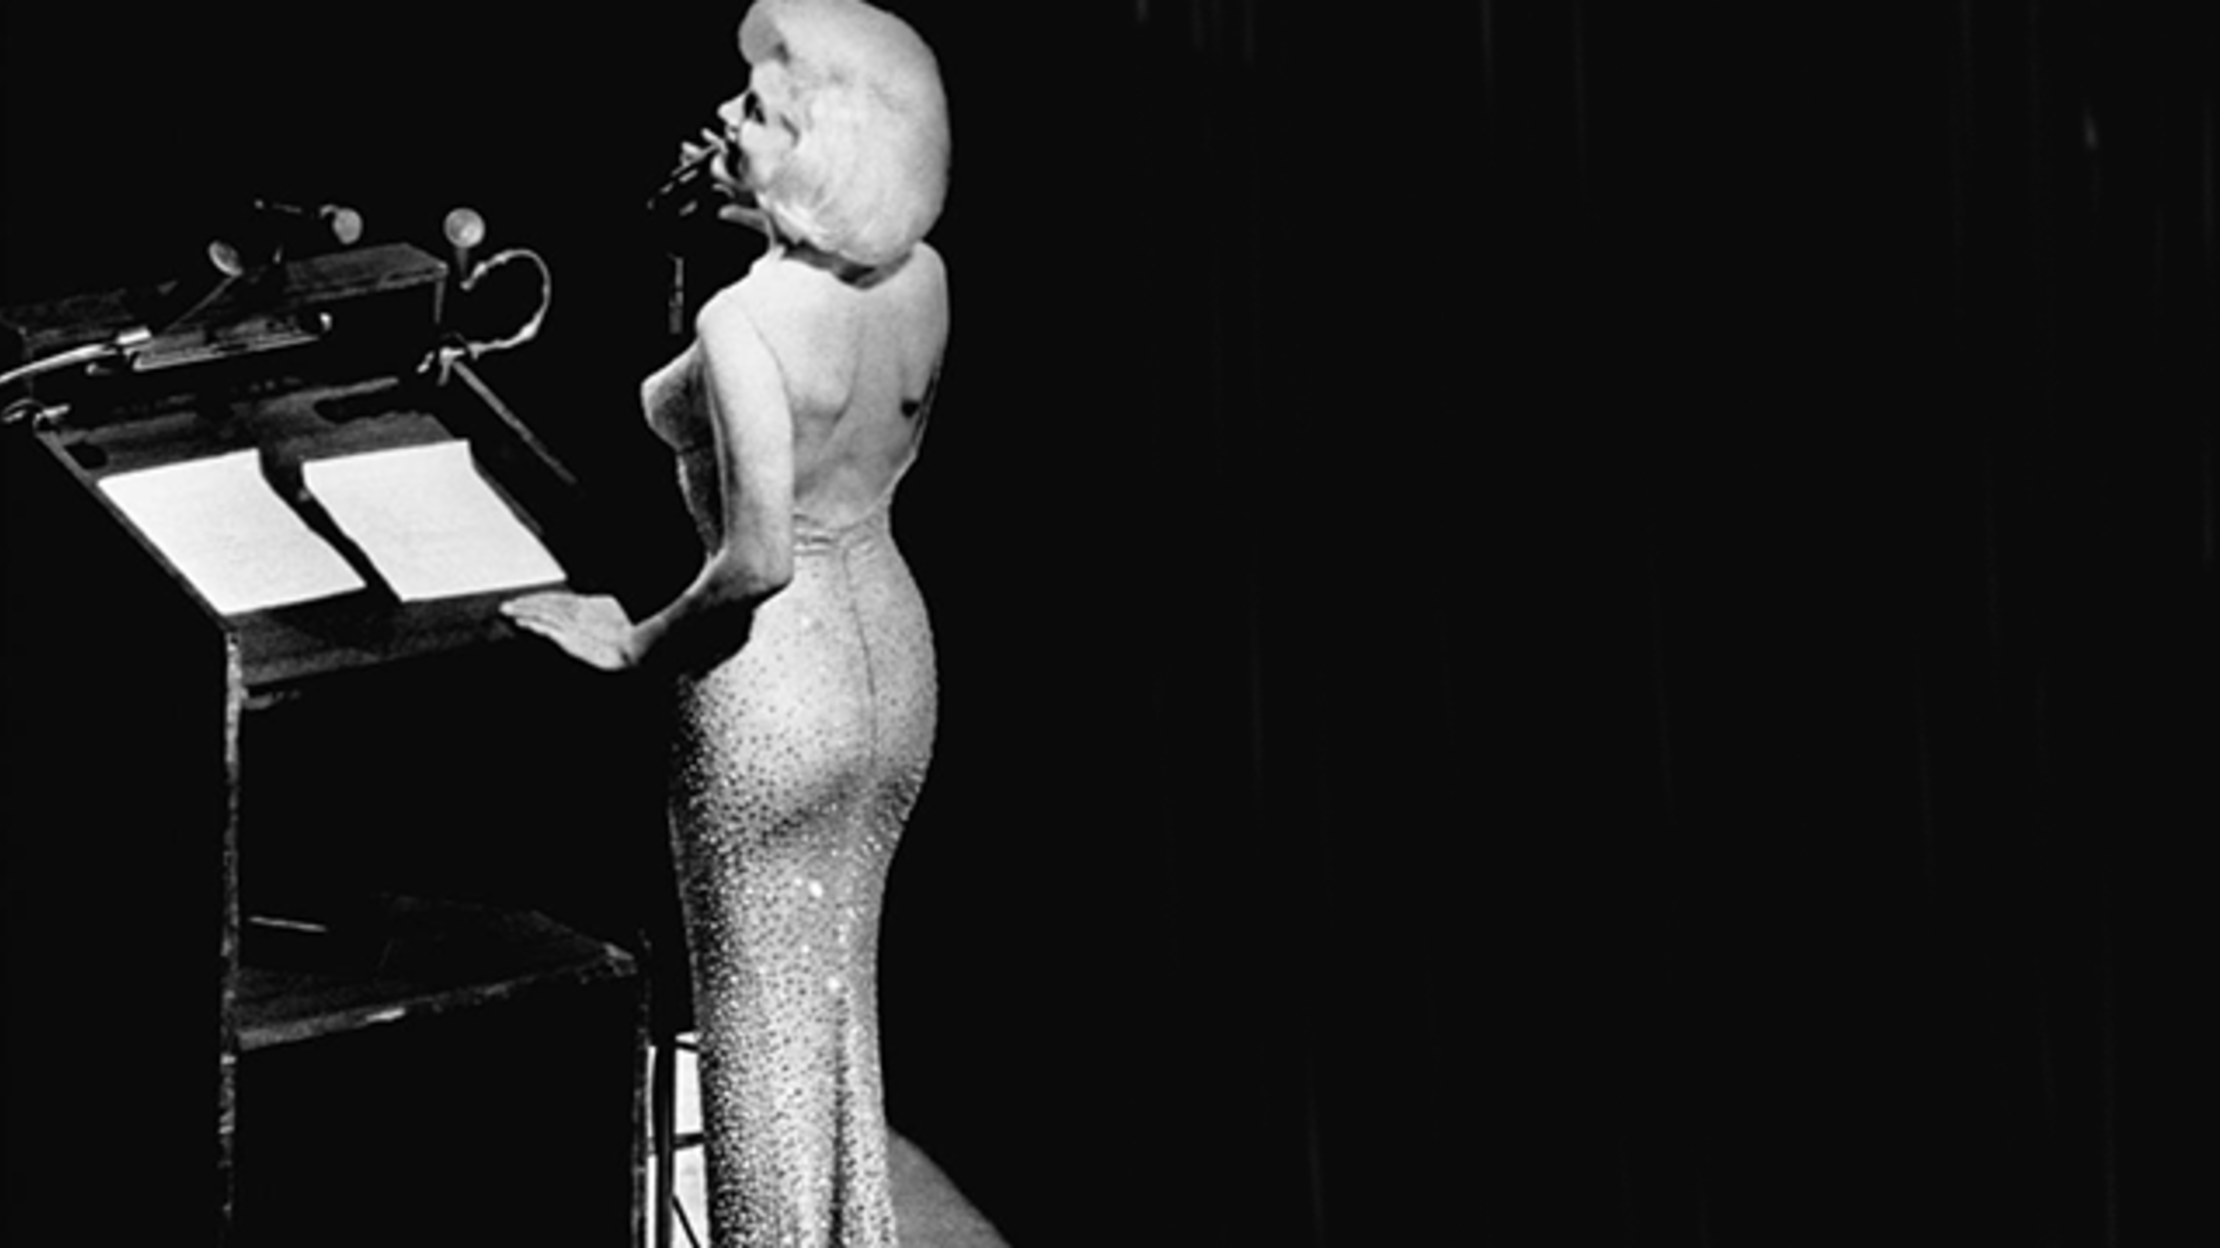 For Sale: The Dress Marilyn Monroe Wore While Singing 'Happy Birthday